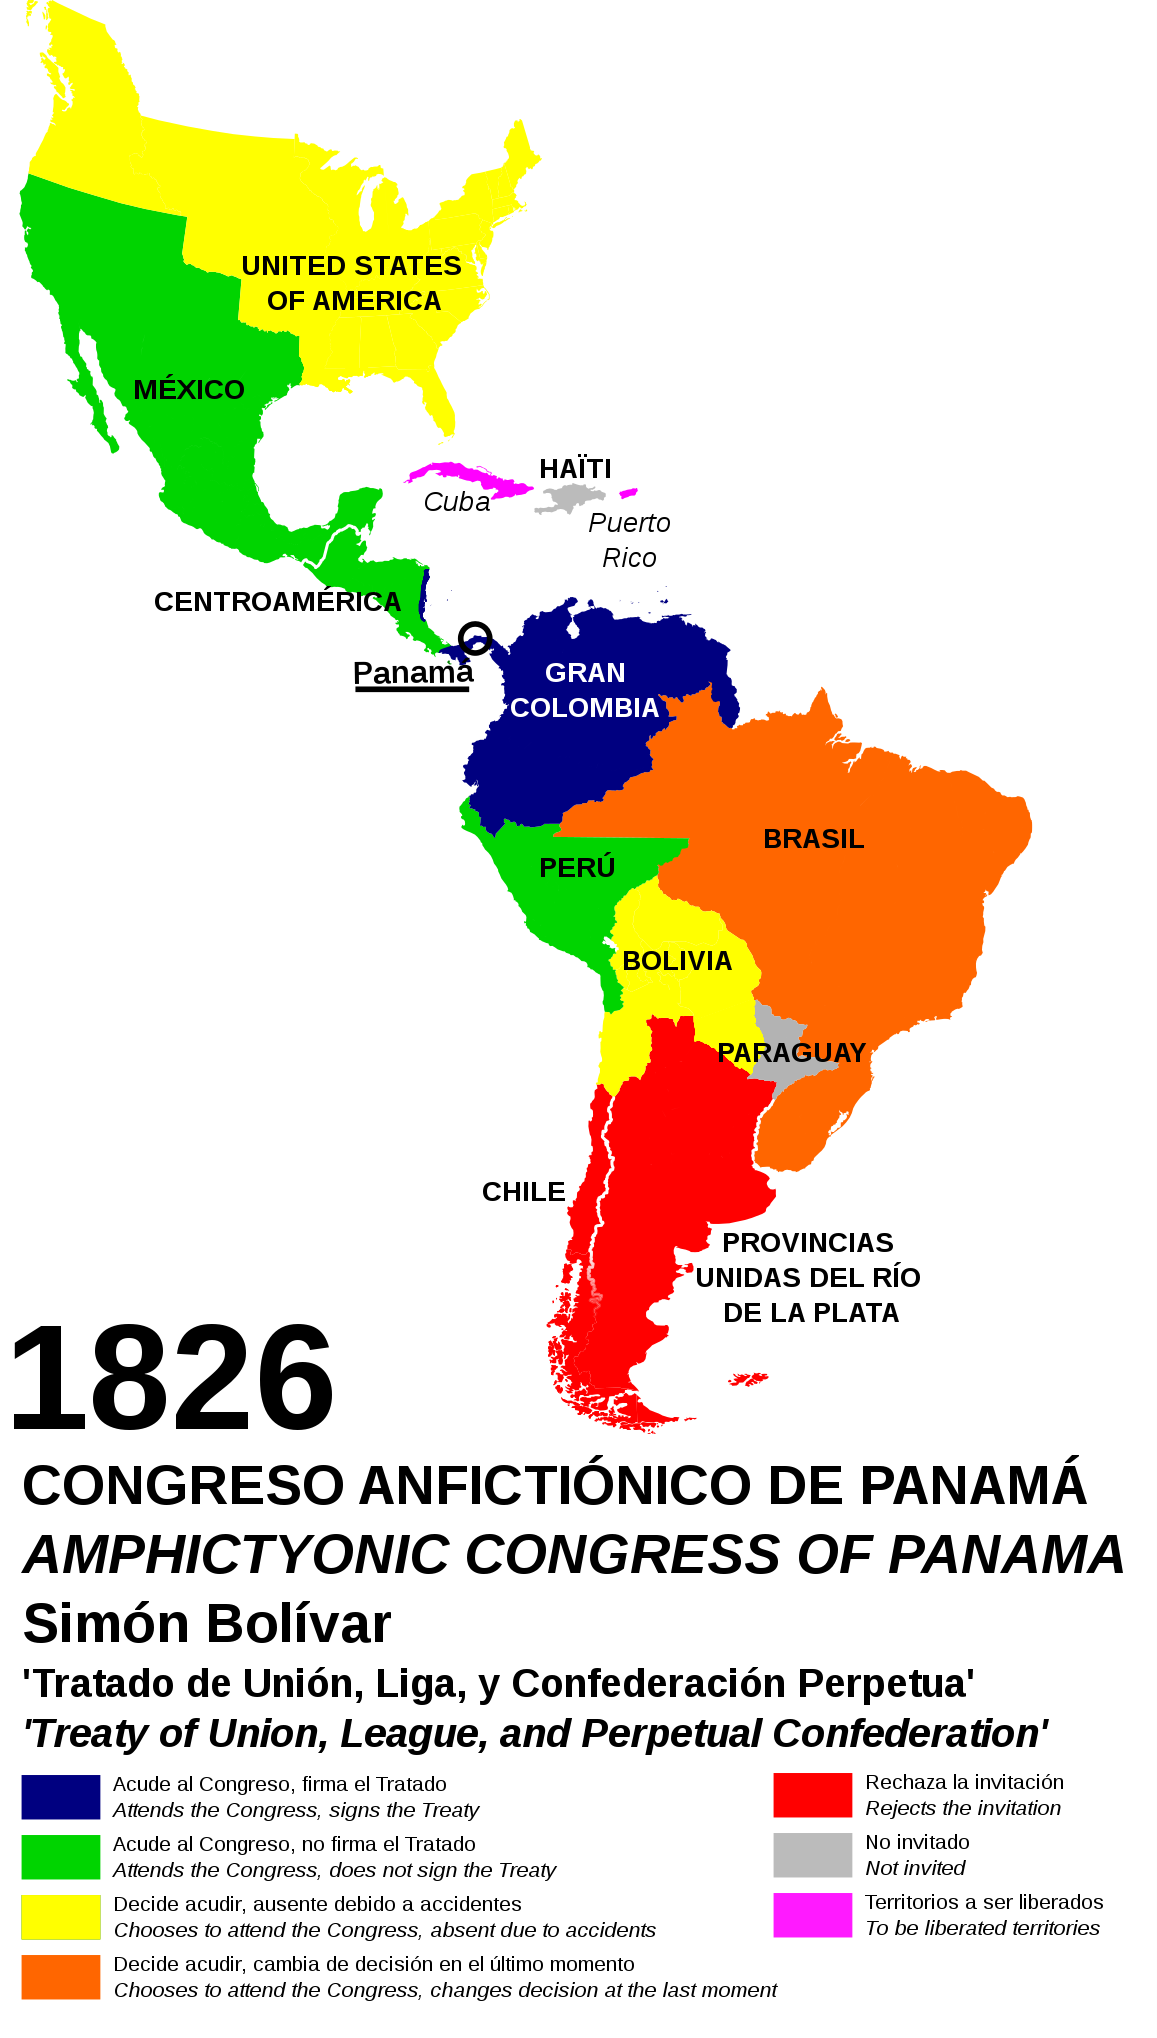 Map of North, Central, and South American countries that were involved with the Panama Congress. Countries are color-coded based on if they attended, were invited, or signed the treaty.